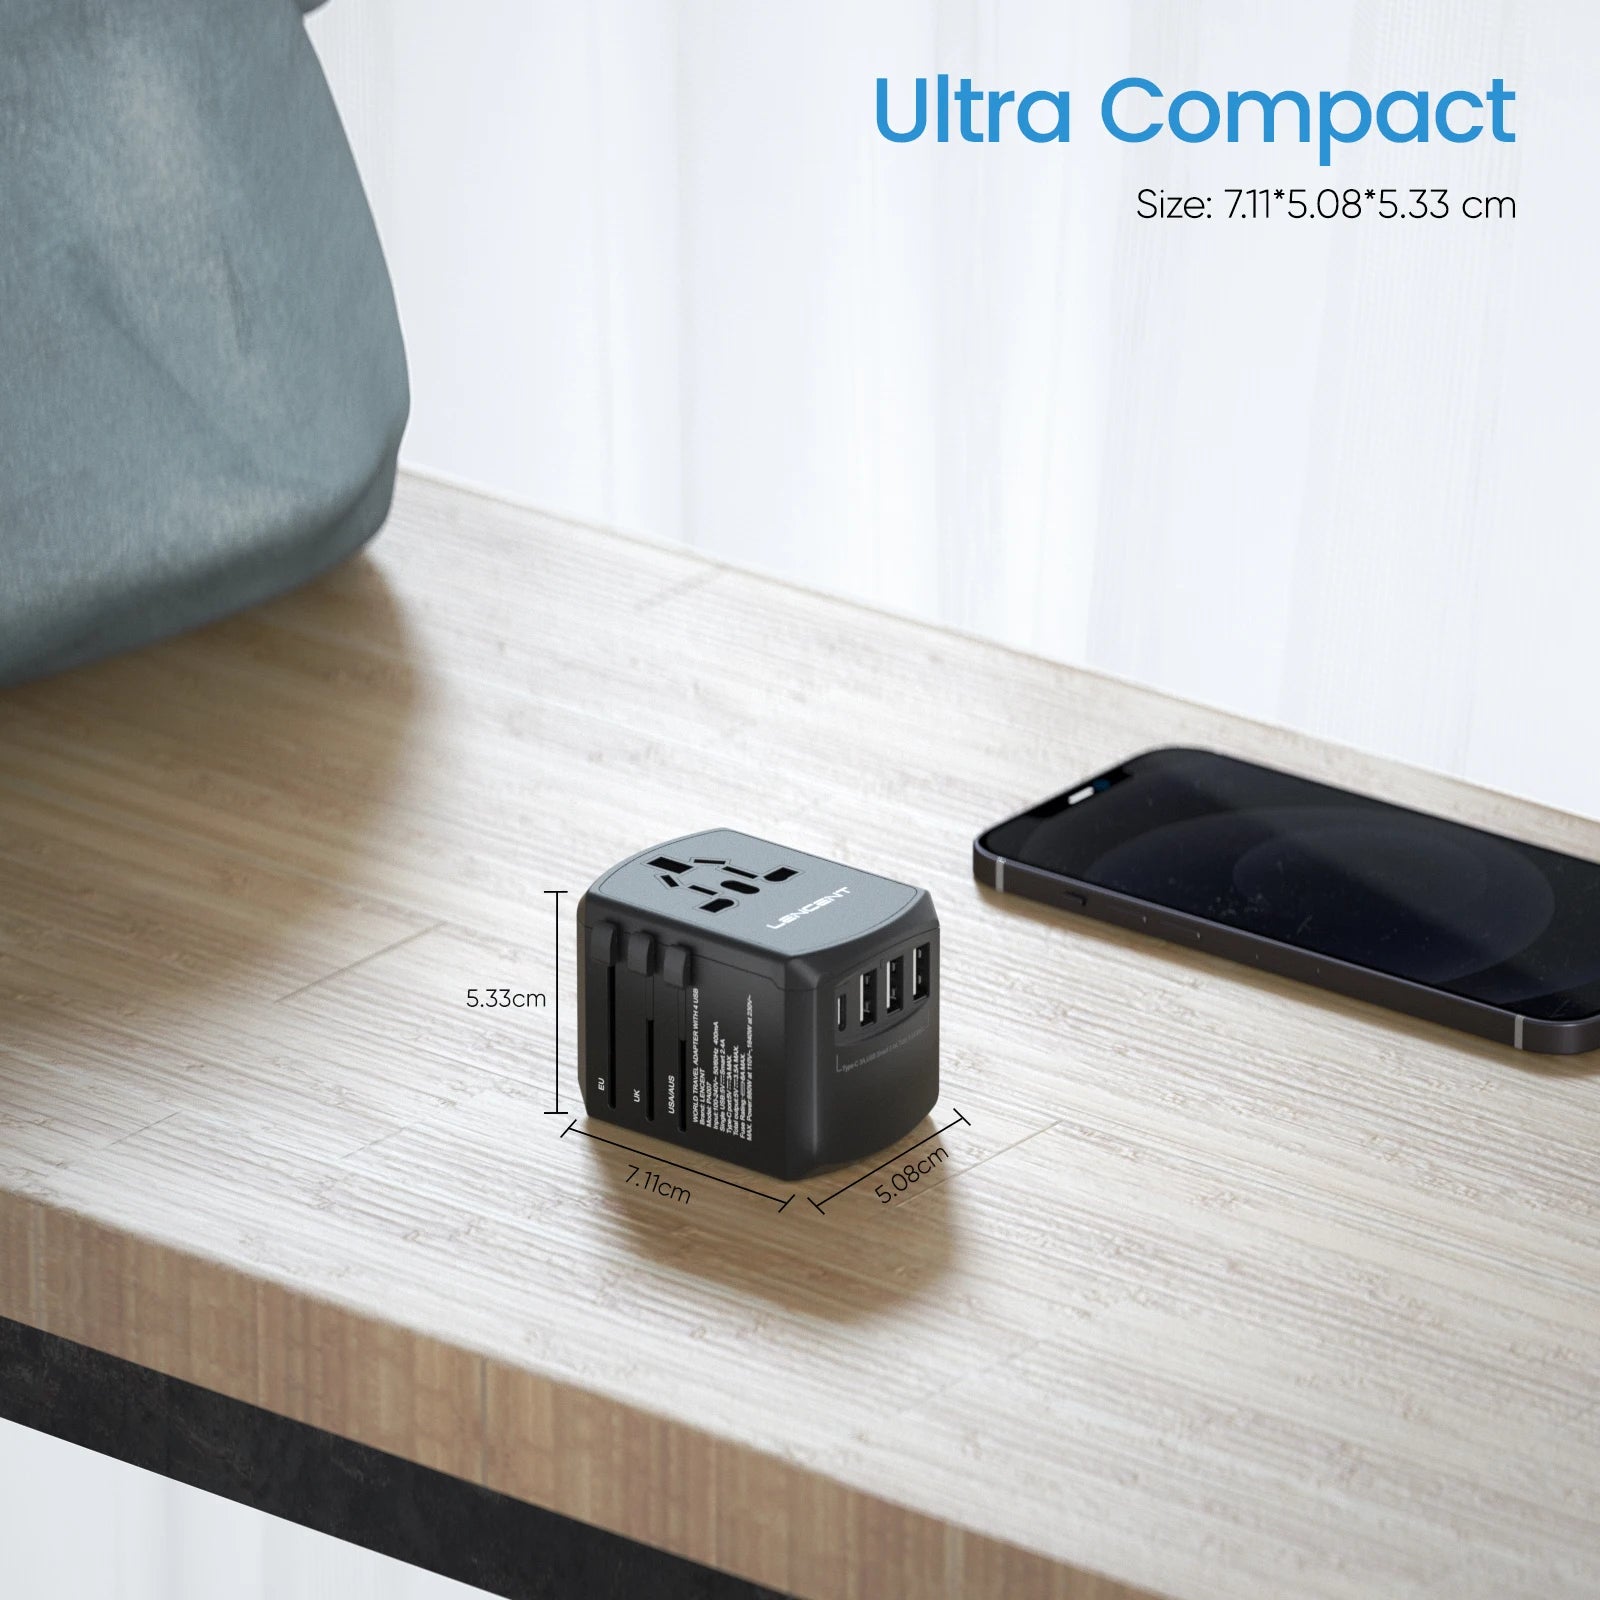 Cloud Discoveries Universal Travel Adapter with 3 USB Ports and 1 Type C Wall Charger - All-in-one Travel Charger for US EU UK AUS Travel - Compact and Portable with Interchangeable Plugs - Safe and Intelligent Charging - FCC, CE, RoHS Approved - Ideal for Global Travelers and Tech Enthusiasts